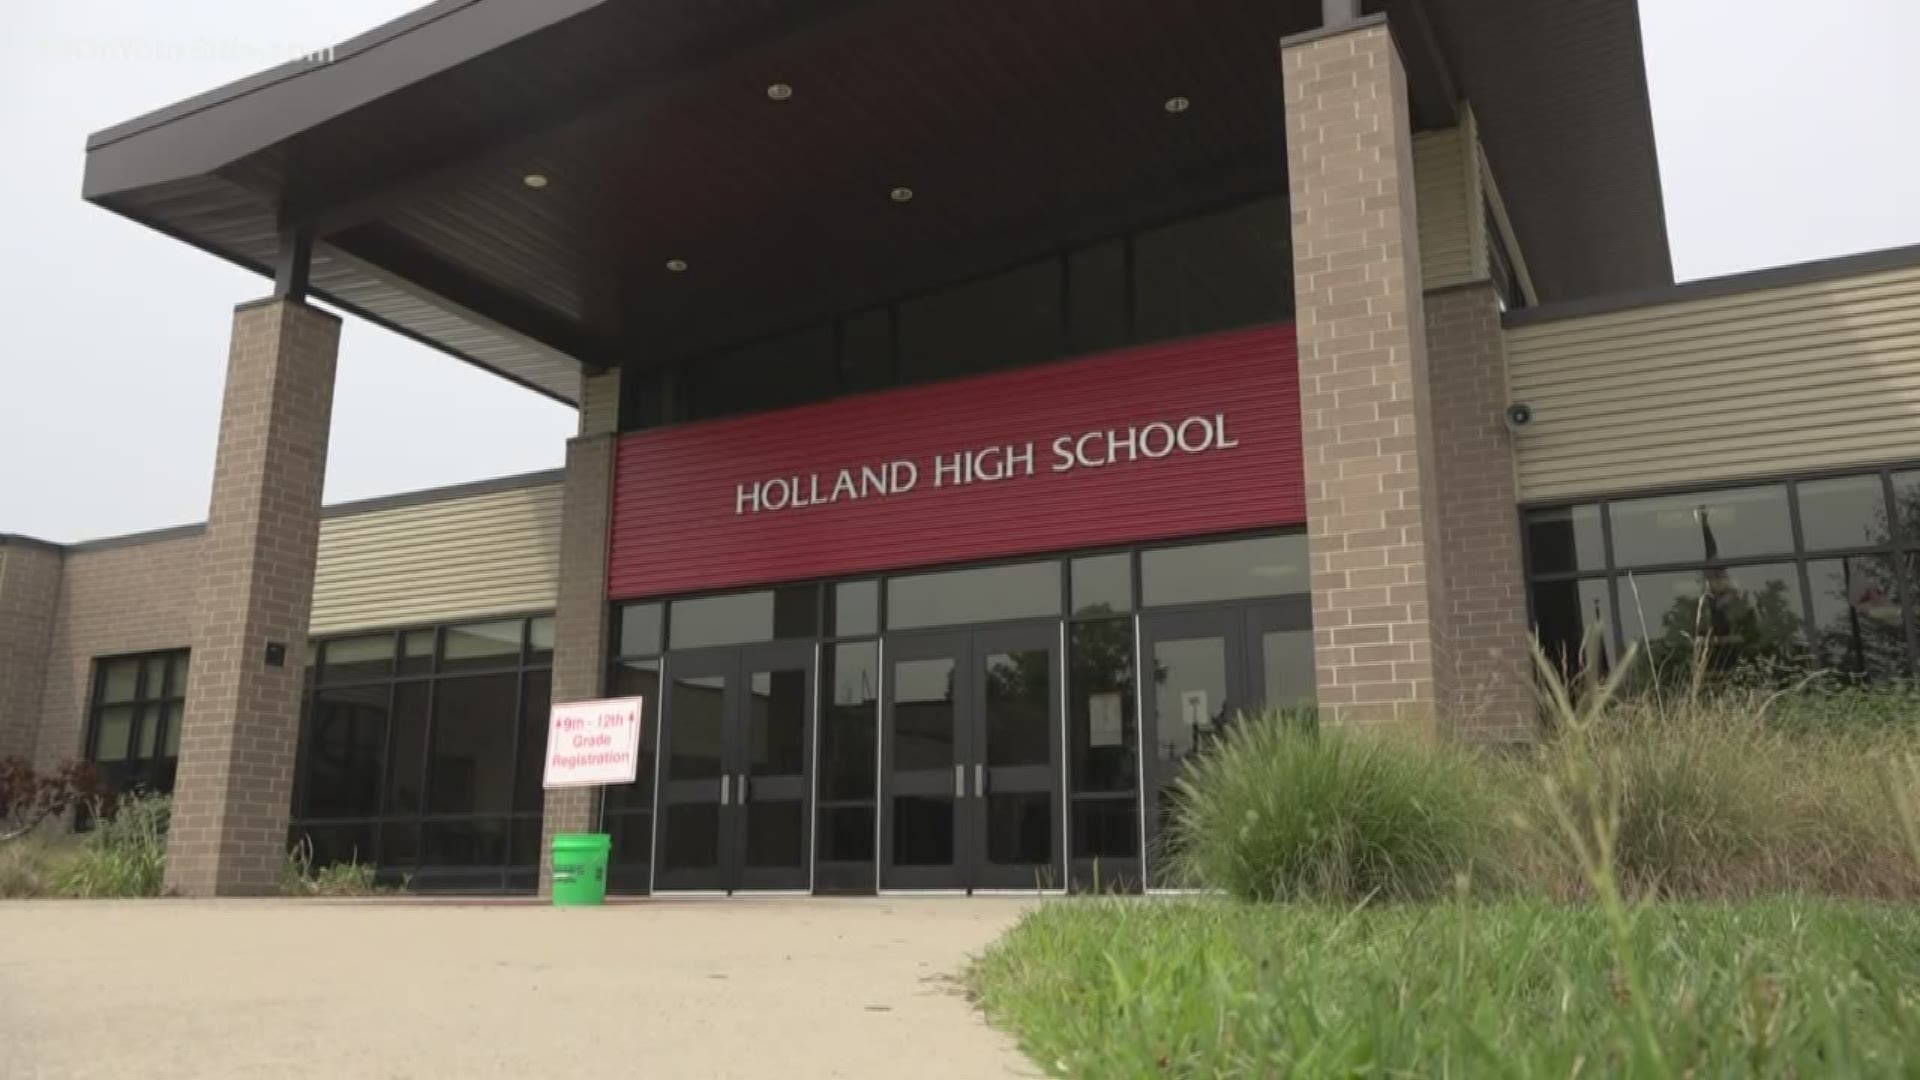 Holland Hospital is implementing a mental health program at Holland High School. The program seeks to address the mental health issues teens face, and to help, a nurse from Holland Hospital will transition into the role of School Mental Health Care Manager.